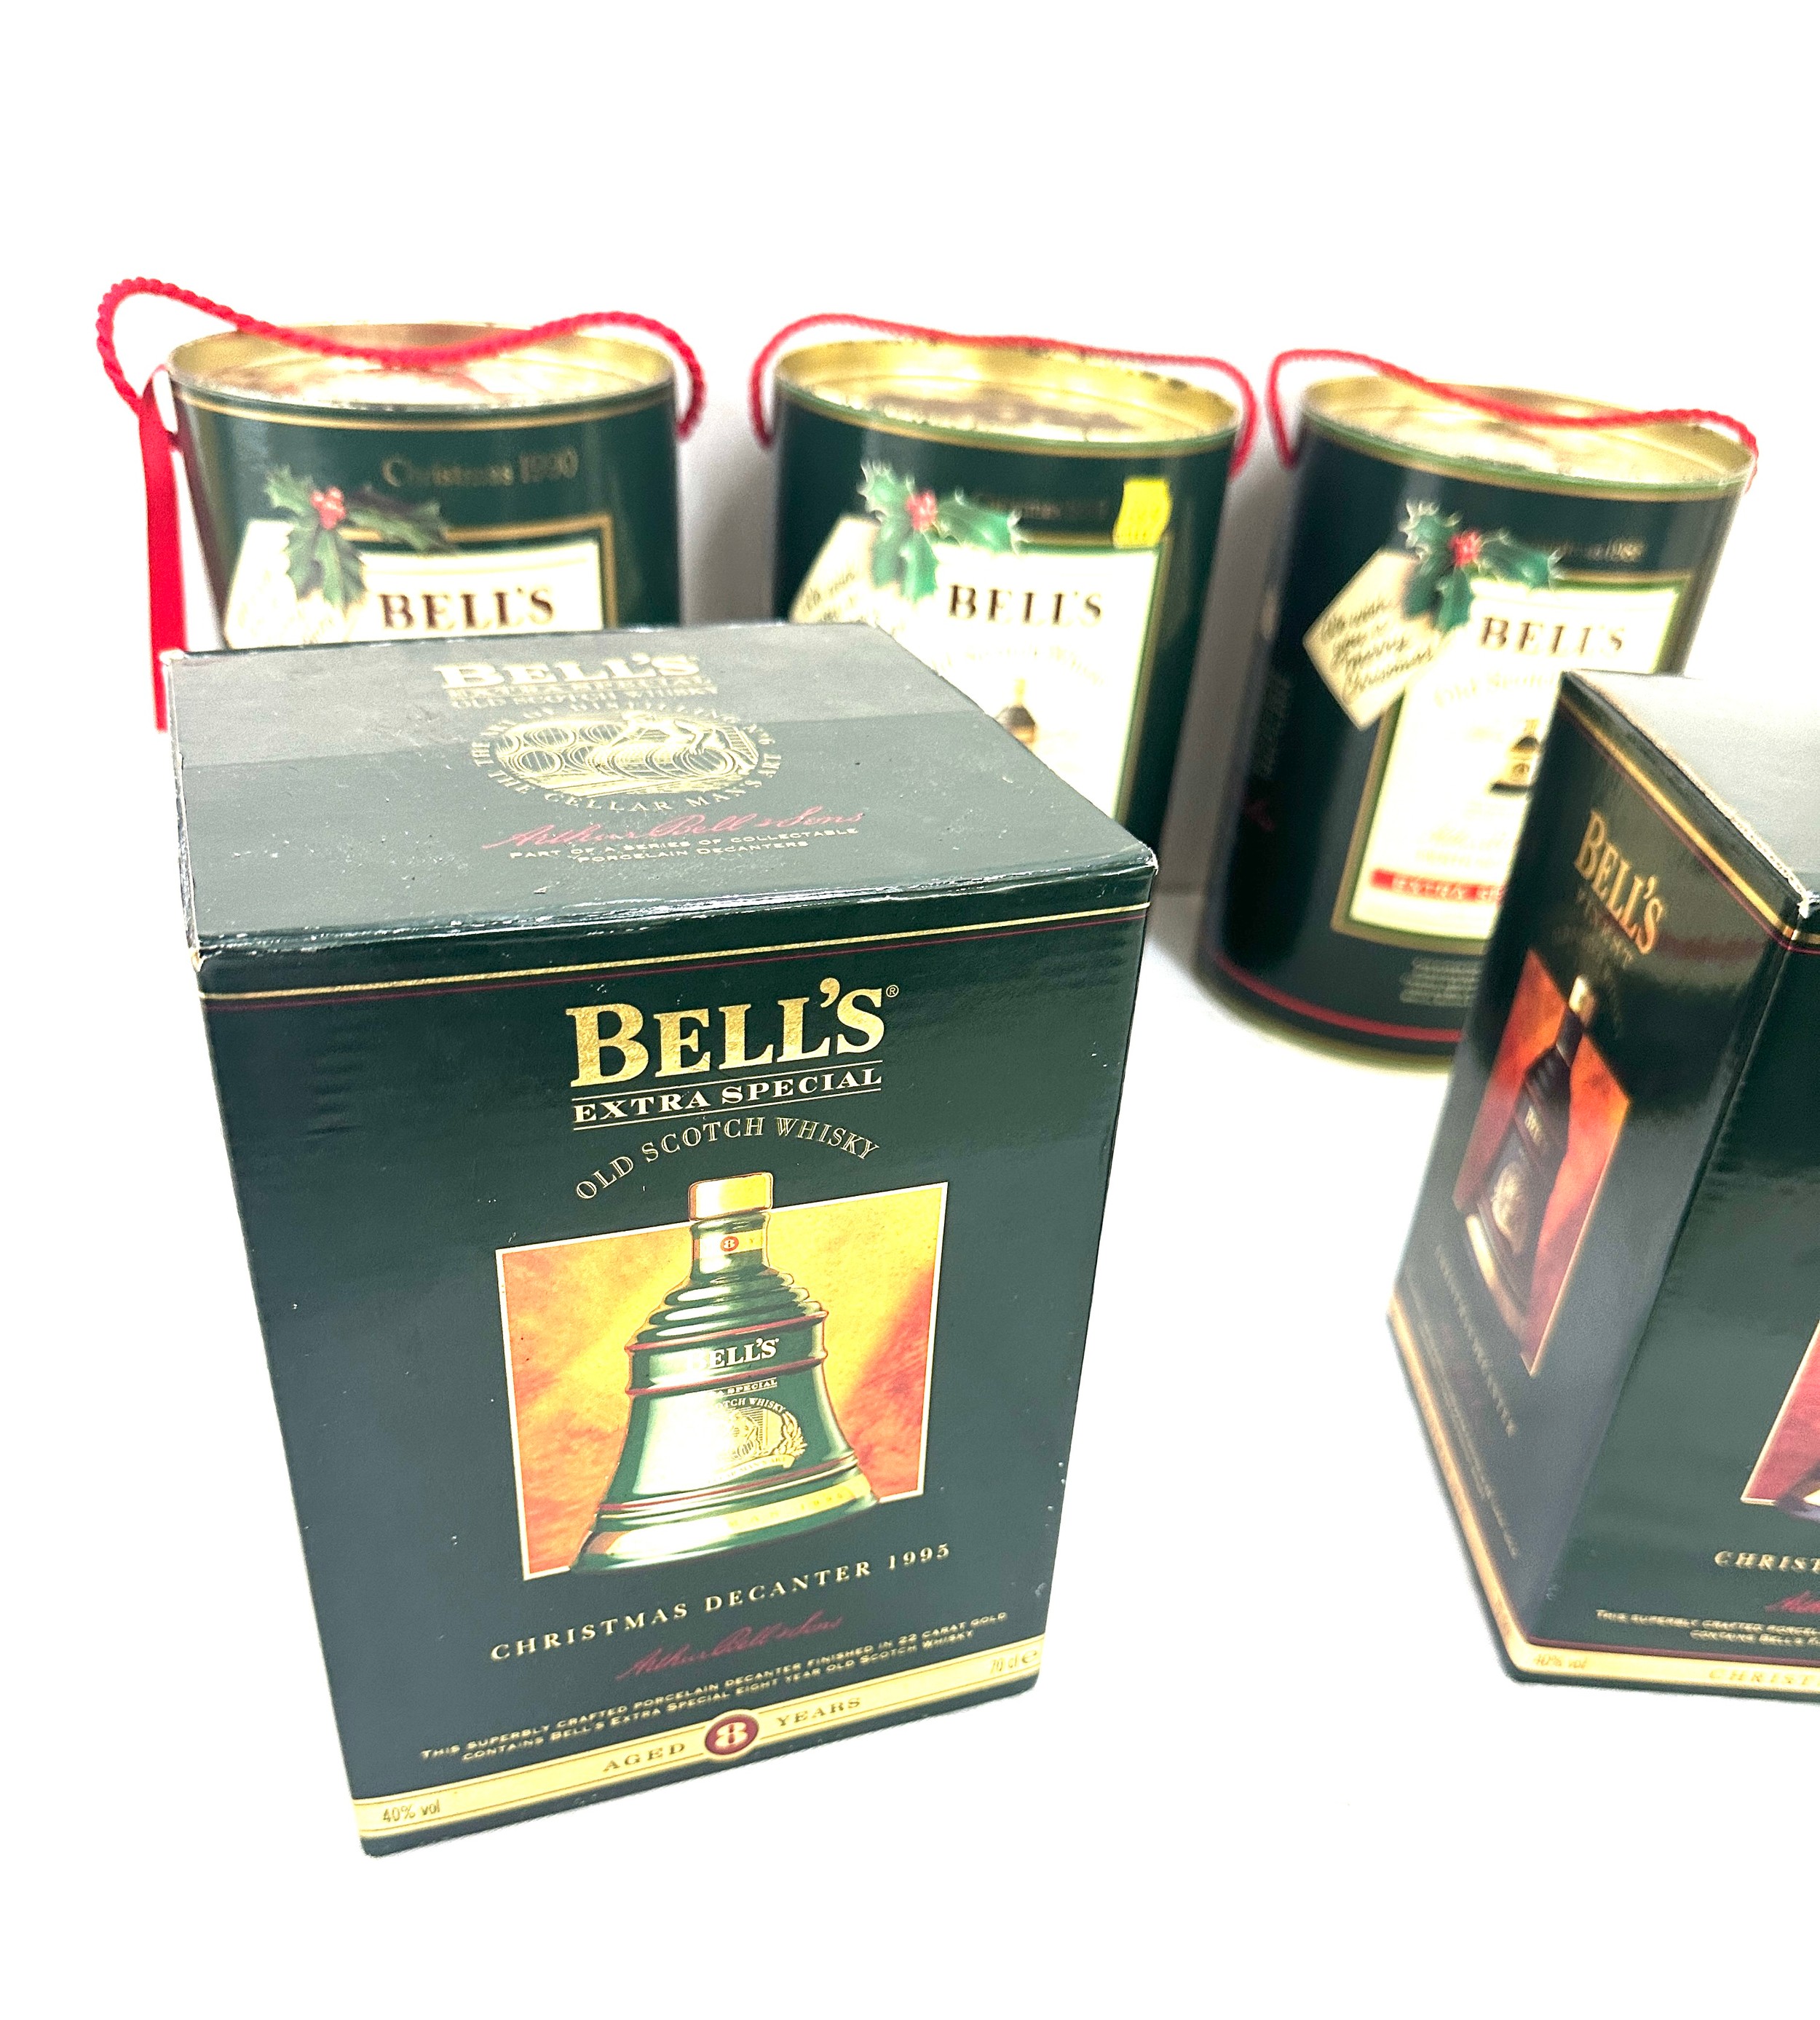 Selection of Bells Old Scotch Whisky Christmas decanters to include Christmas 1990, 1988, 1989, 1992 - Image 4 of 8